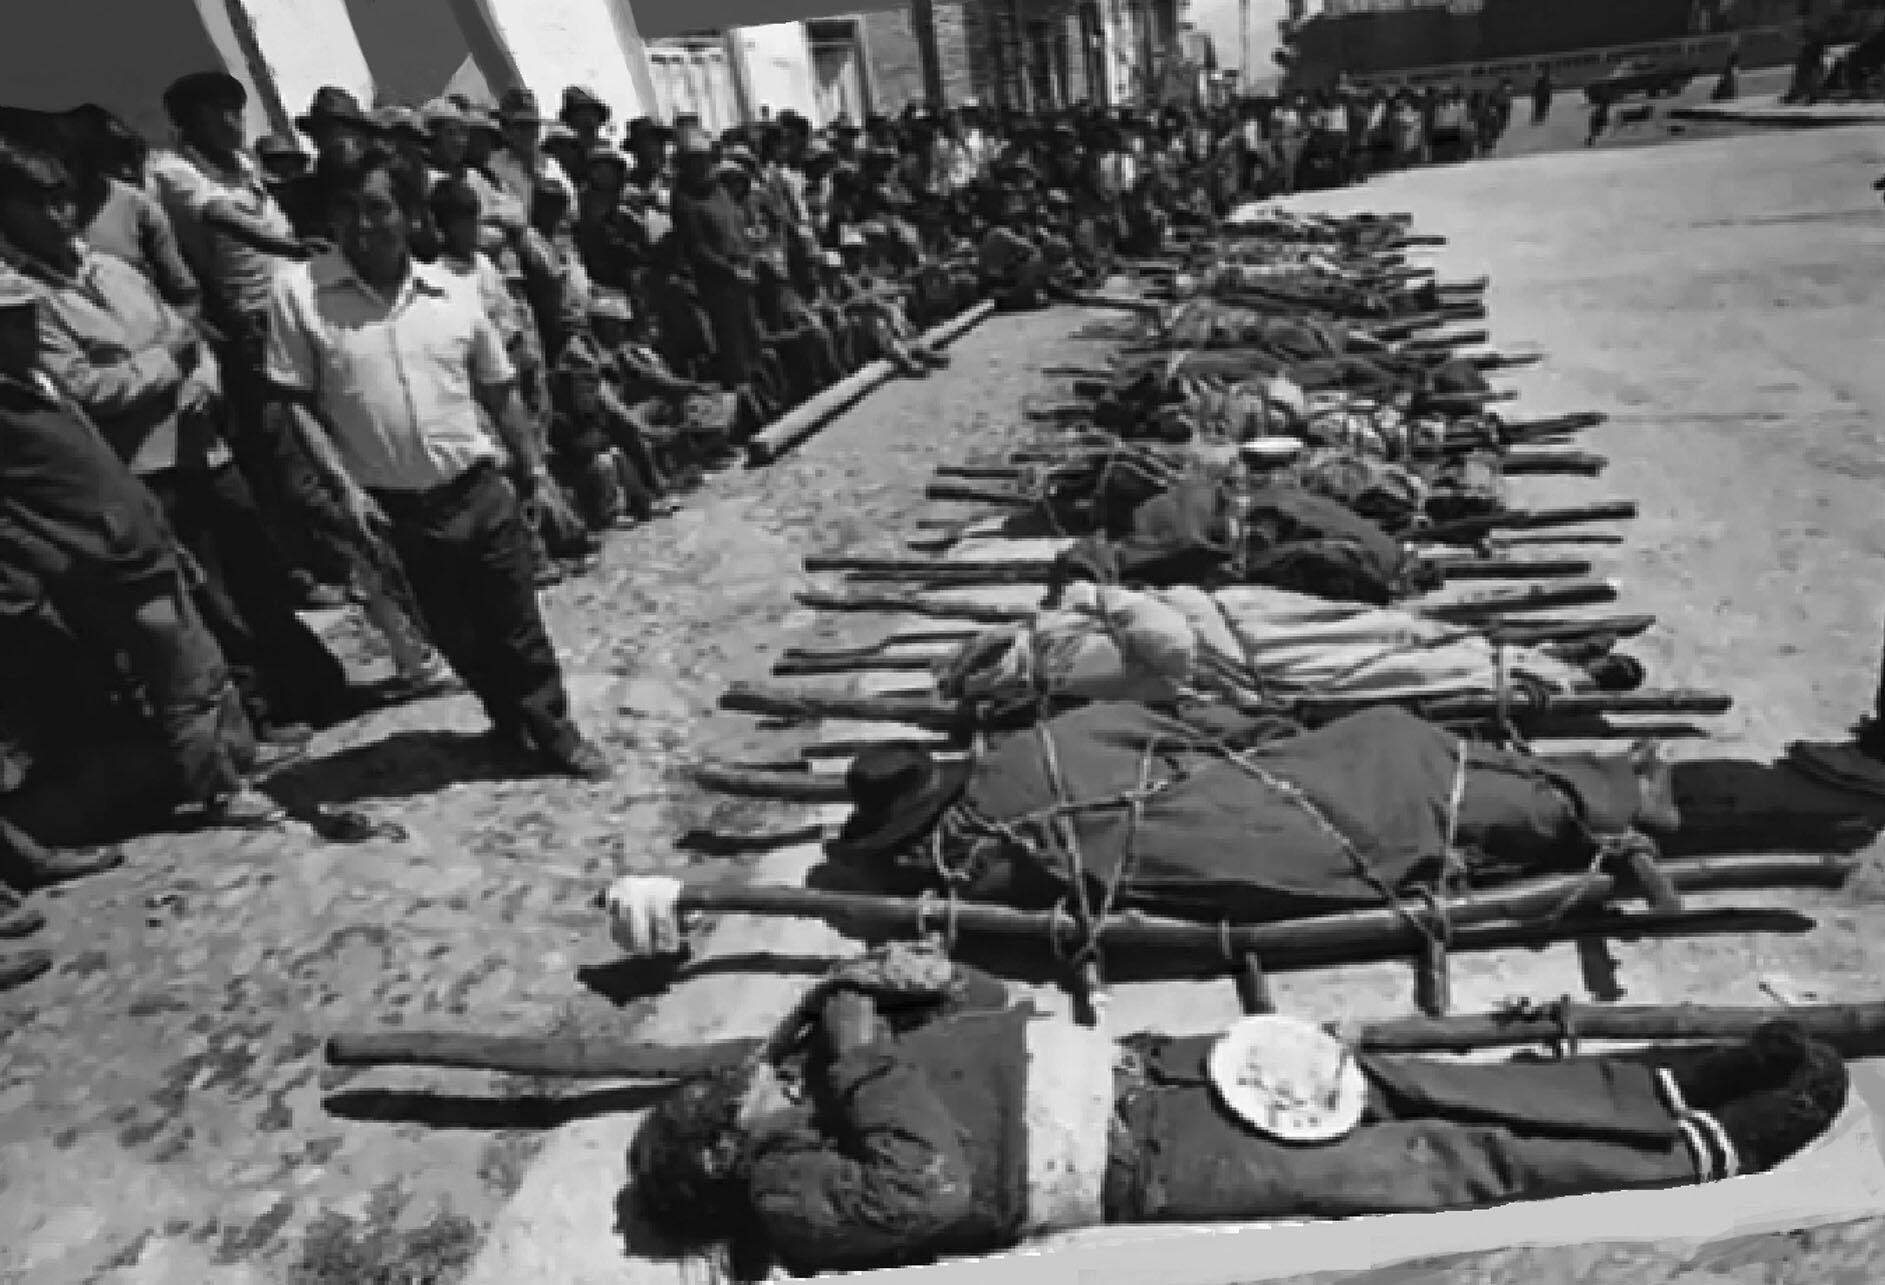 Bodies of people killed in the 1983 Lucanamarca massacre lie in the street. (Image courtesy of Yuyanapaq-LUM.)